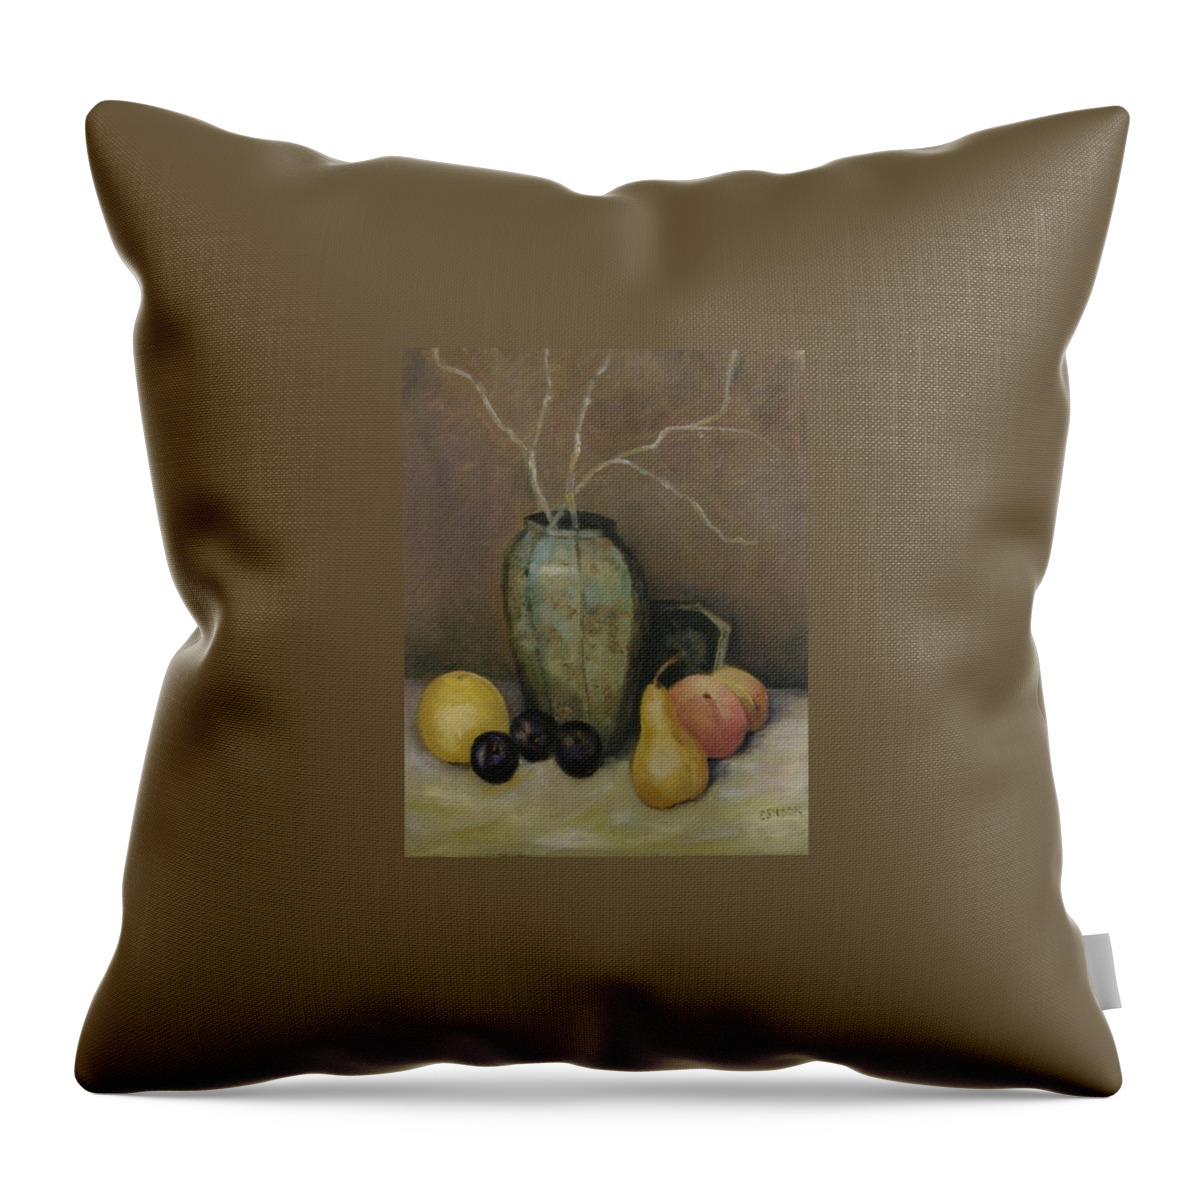 Still Life Throw Pillow featuring the painting Vase With Fruit by Pat Snook